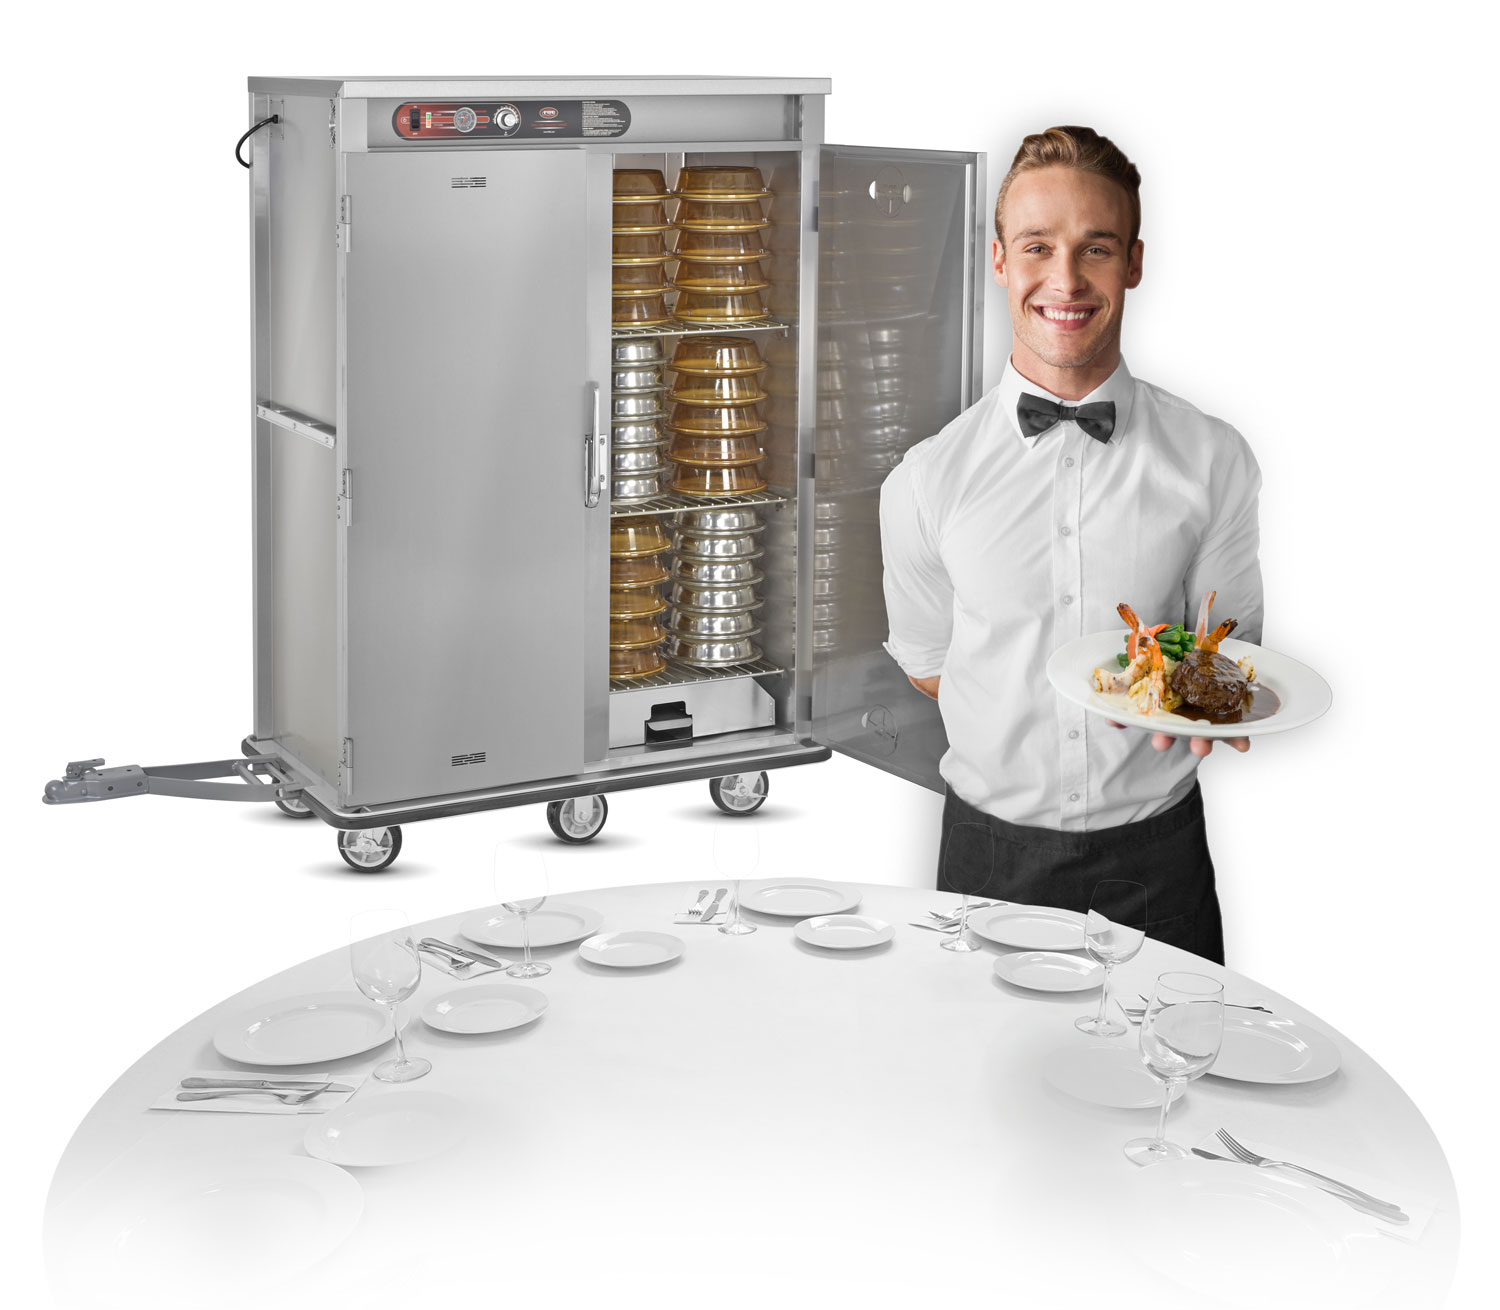 Feed Your Guests from the Best! FWE's Special Offer with FREE SHIPPING & SPECIAL PRICING on Banquet & Hospitality Facility Foodservice Equipment!